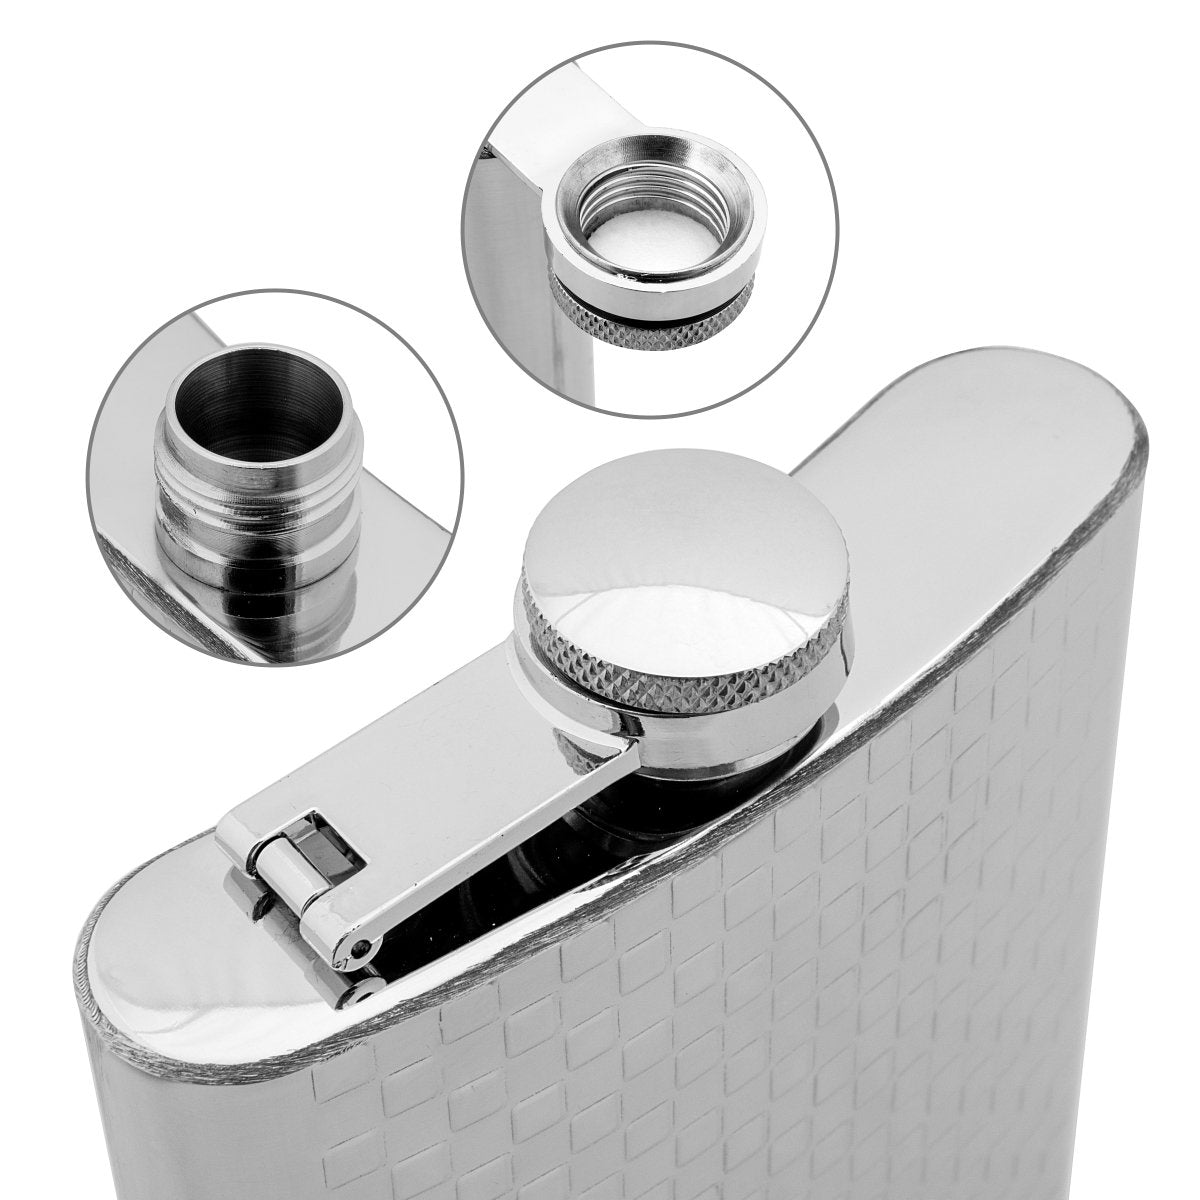 8 oz Silver Stainless Steel Hip Flask for Alcohol Beverages